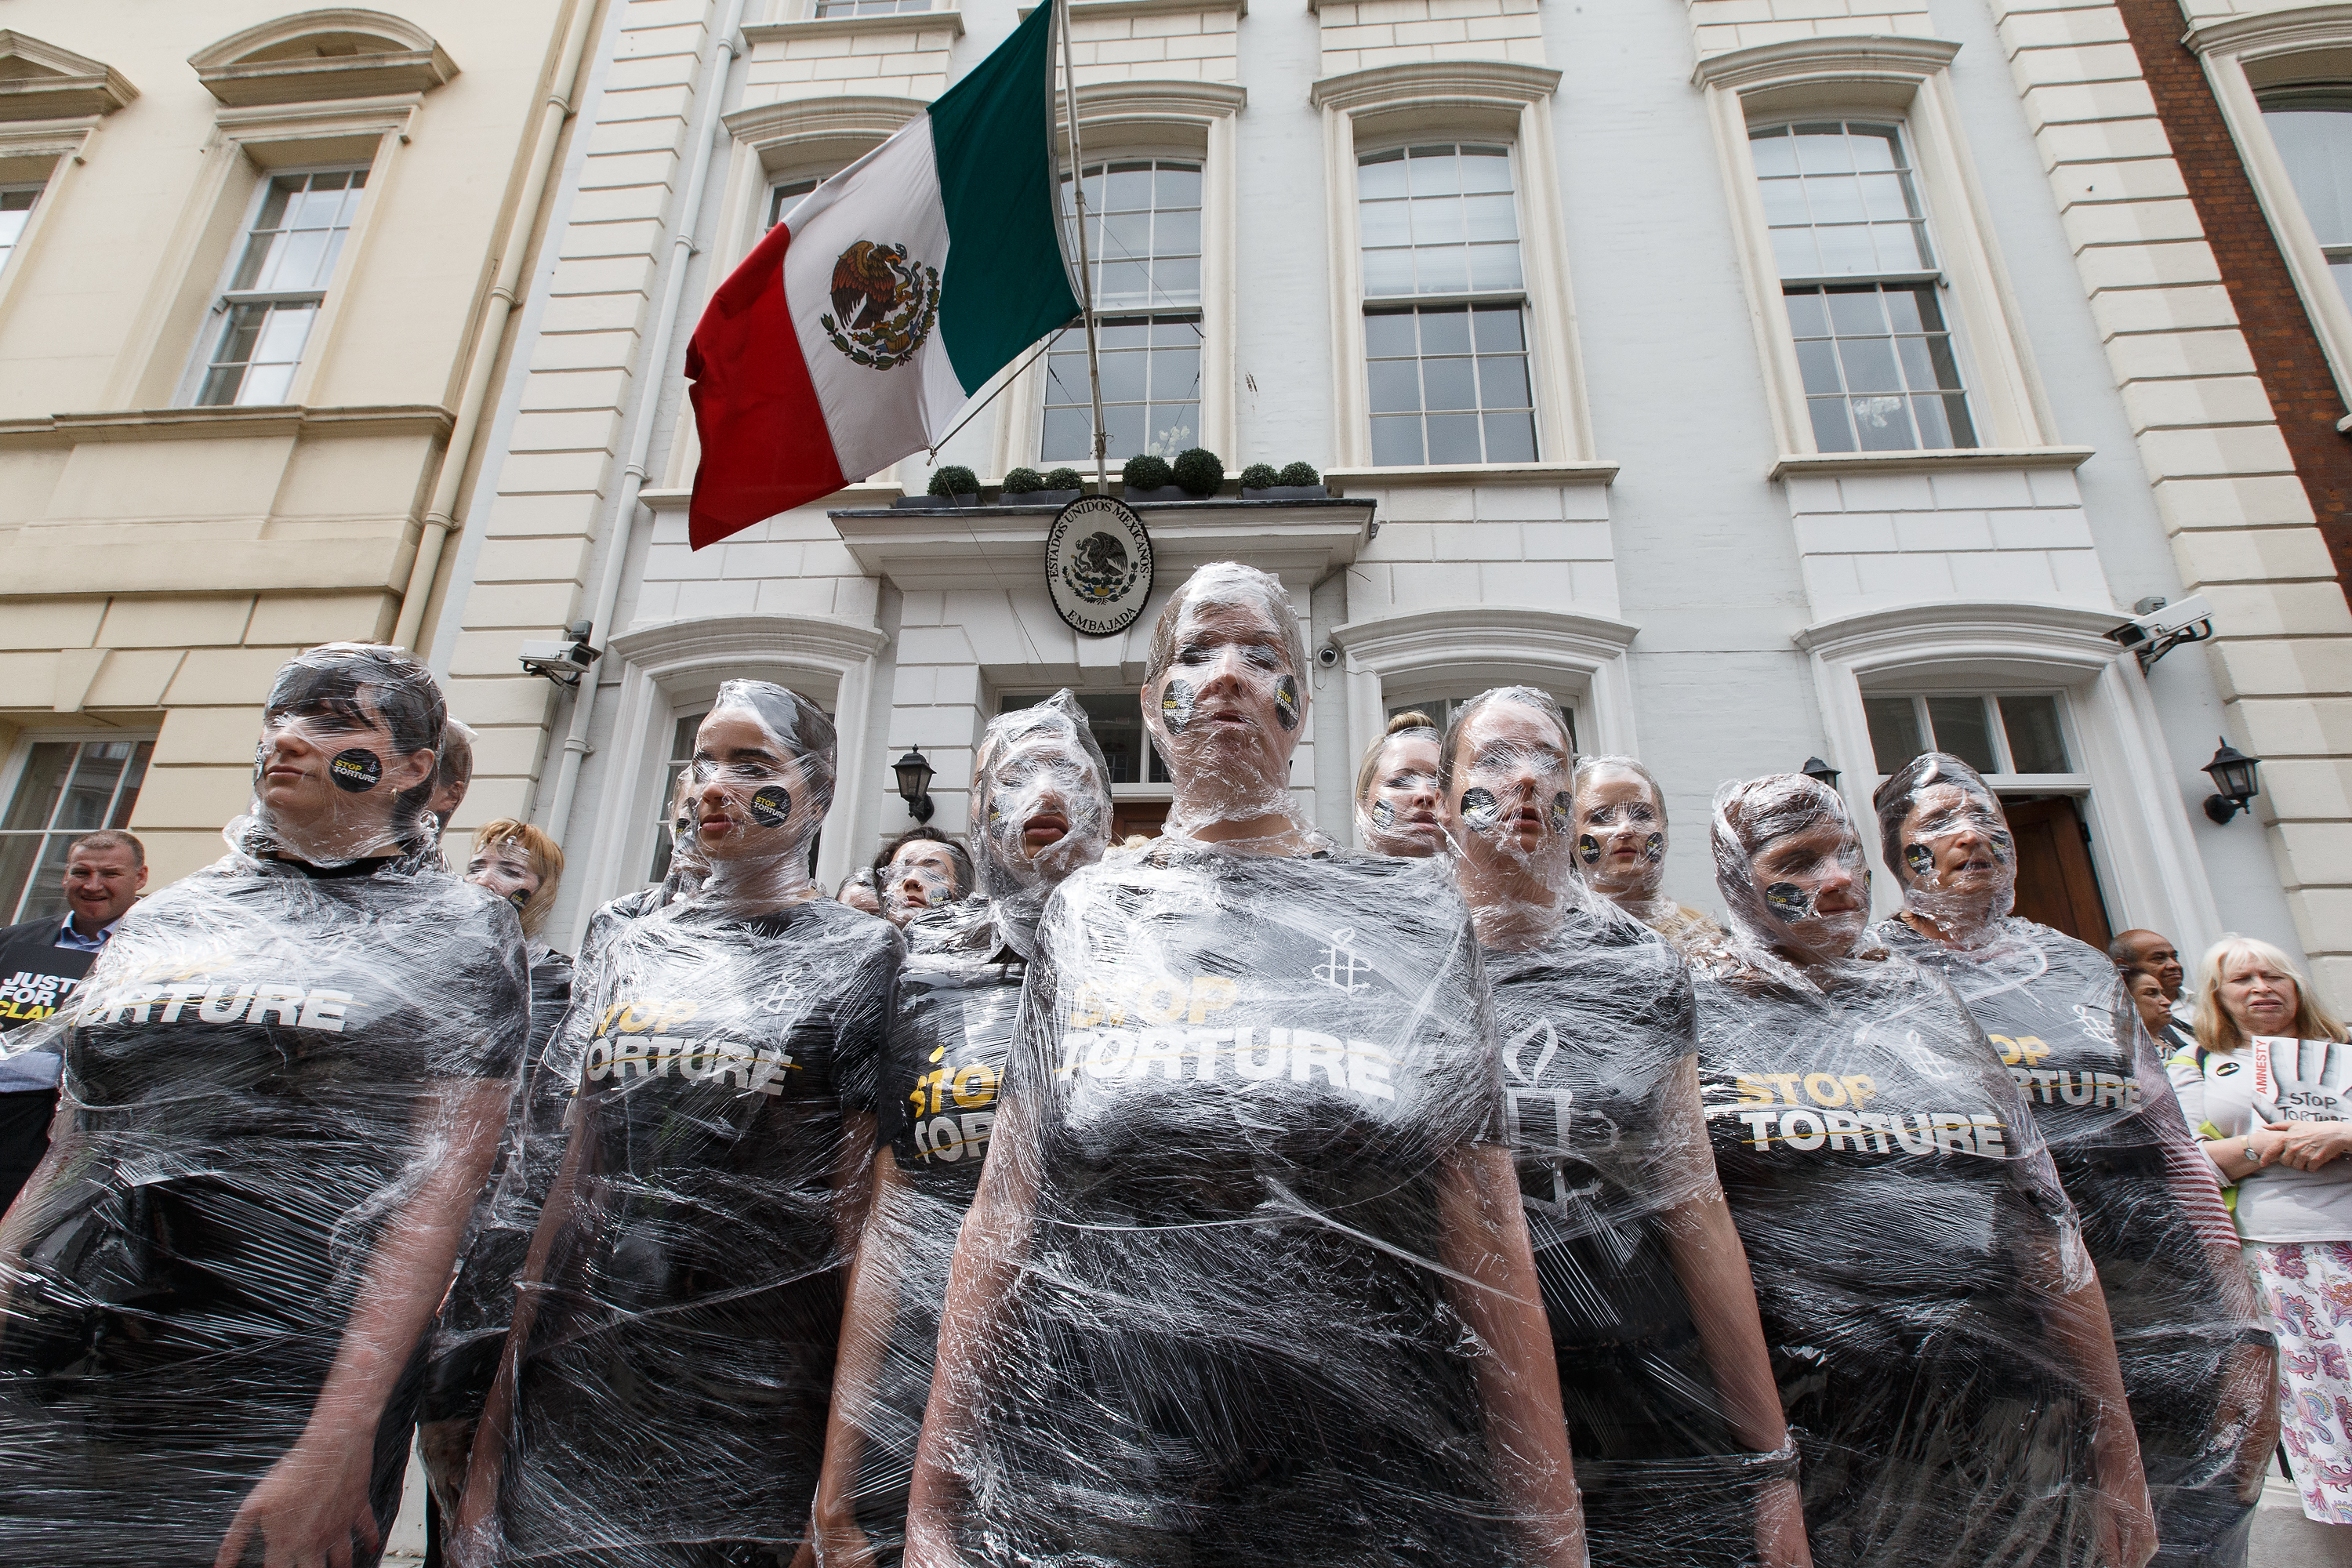 Amnesty International staged a protest against torture in Mexico